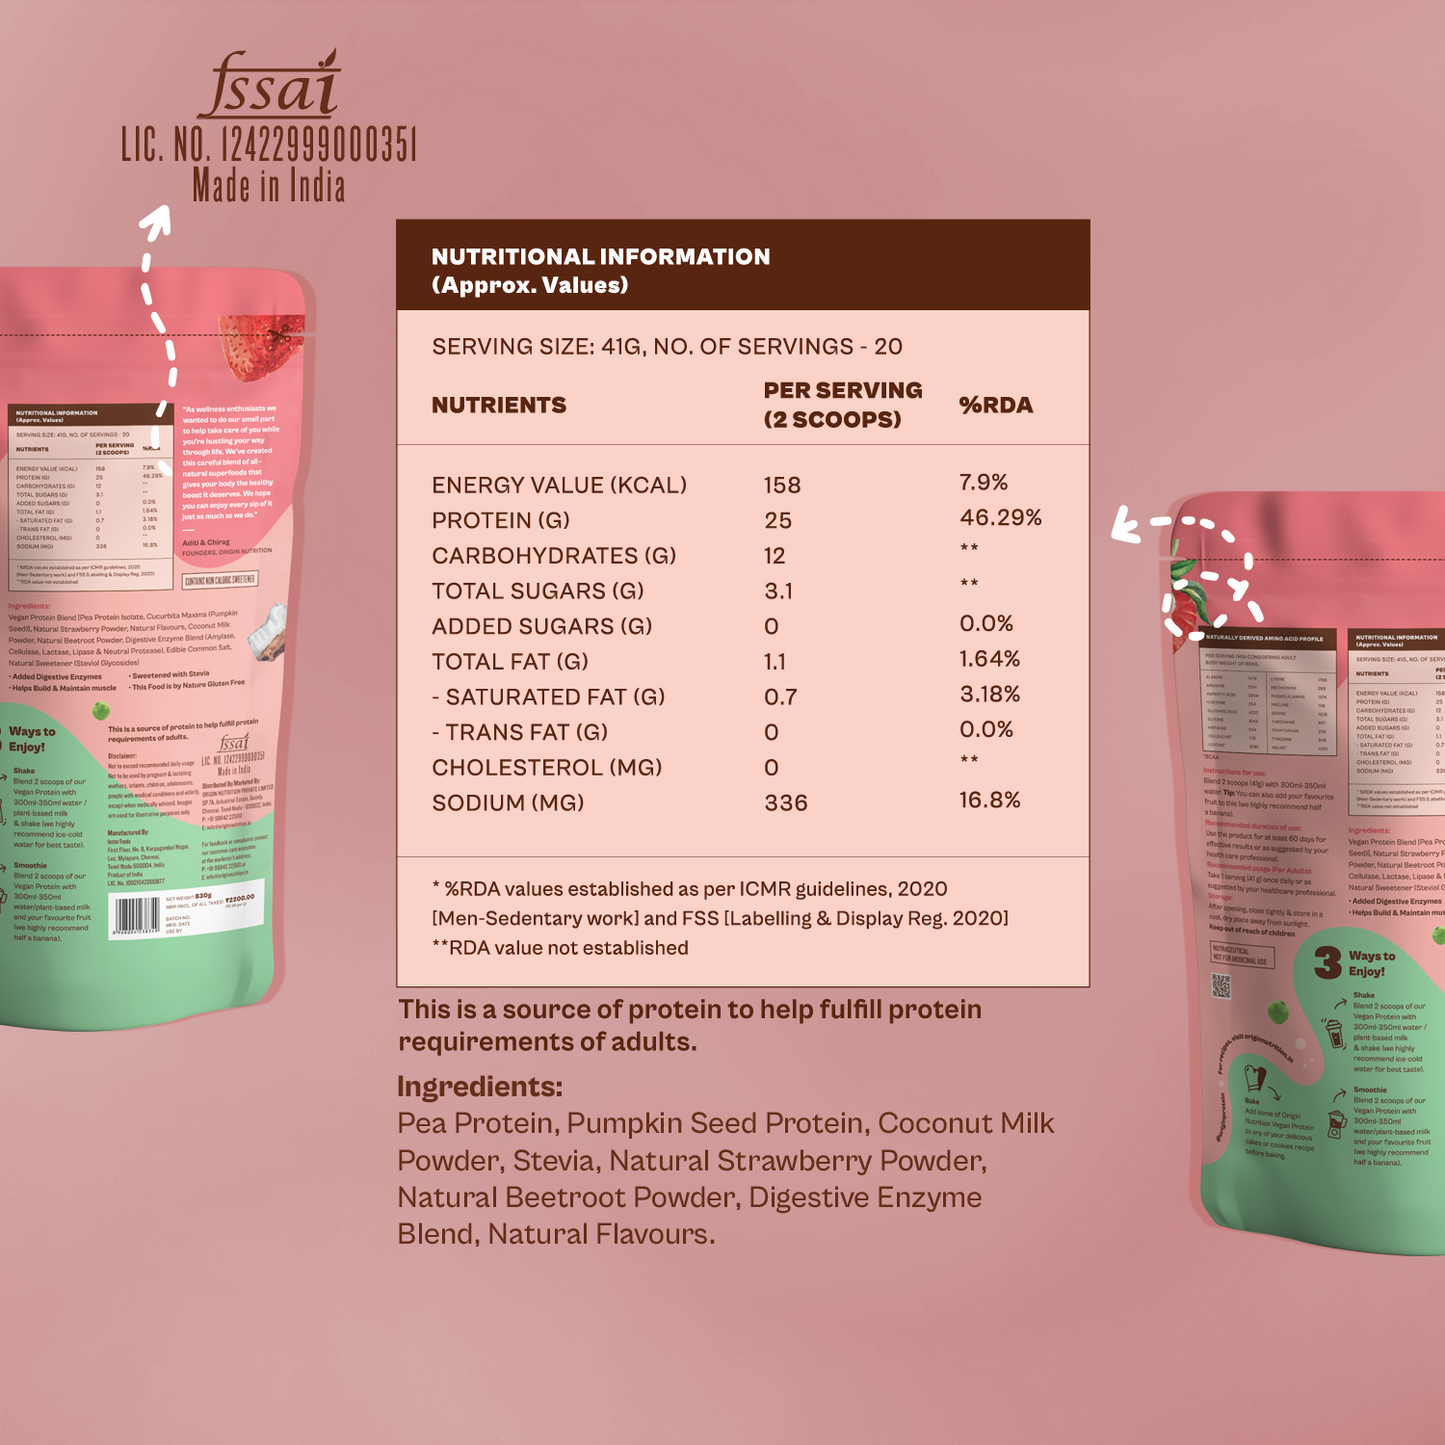 Origin Nutrition 100% Natural Plant Protein Powder Strawberry Flavour with 25g Protein Per Serving , 830g